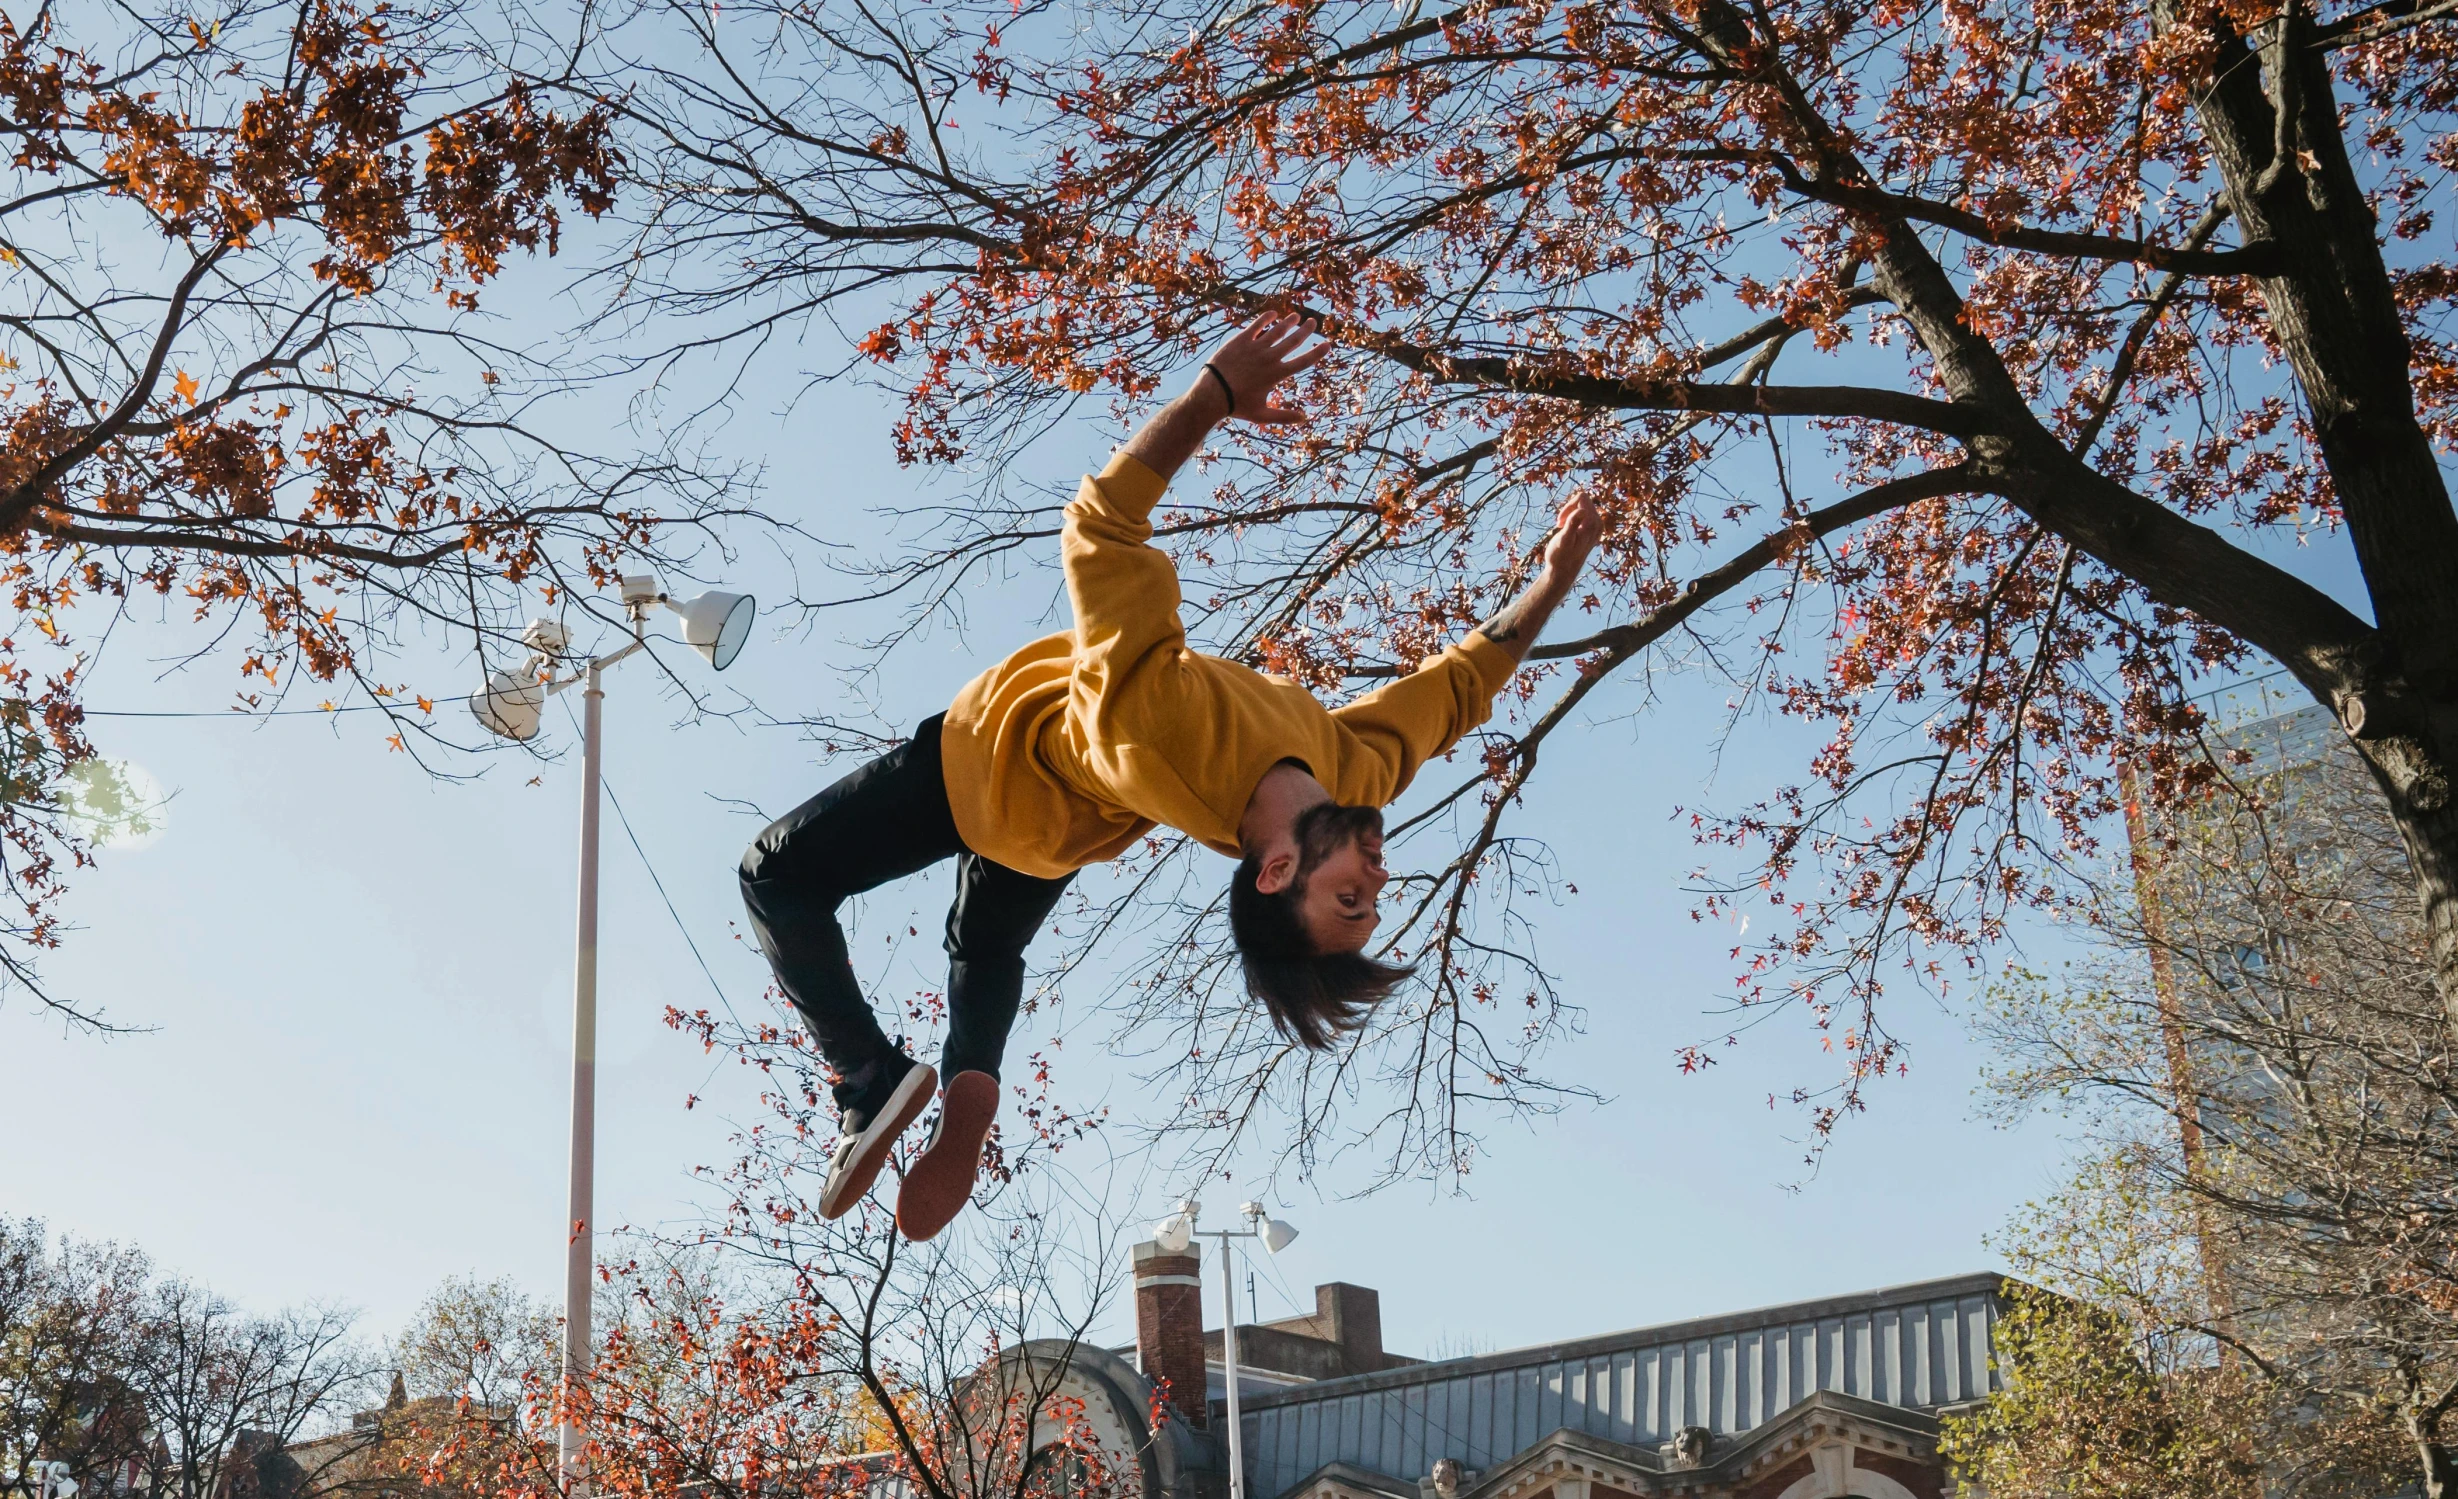 a man flying through the air while riding a skateboard, by Niko Henrichon, pexels contest winner, arabesque, hanging upside down from a tree, autumnal, contemporary dance poses, spring season